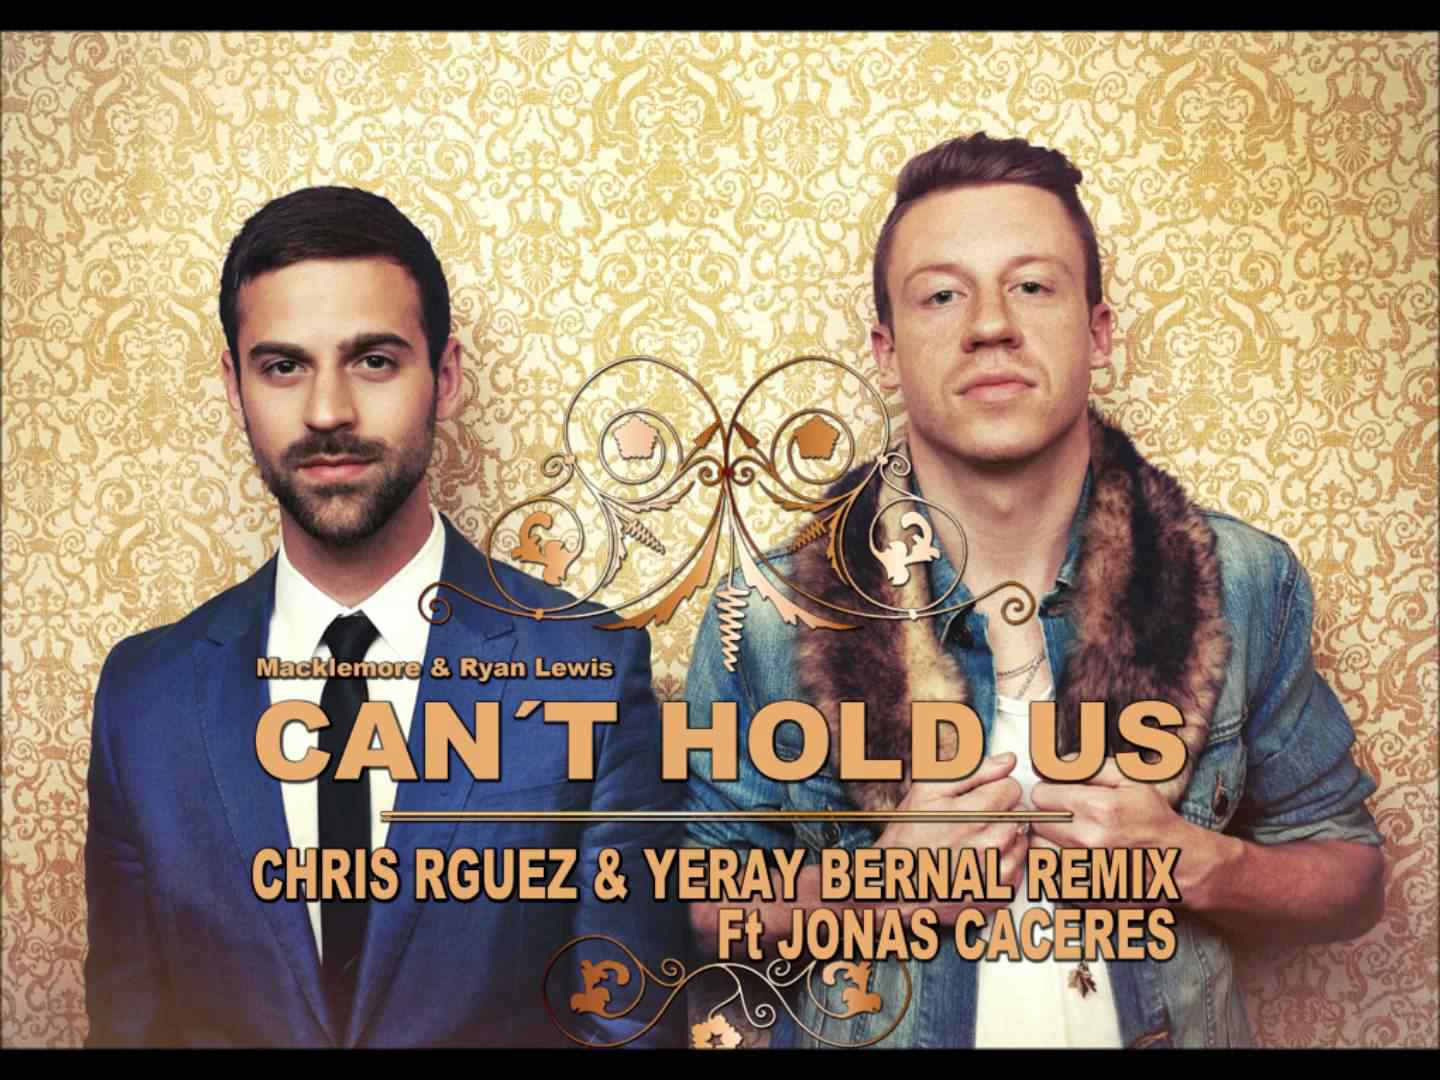 Macklemore & Ryan Lewis feat. Ray Dalton - Cant hold us